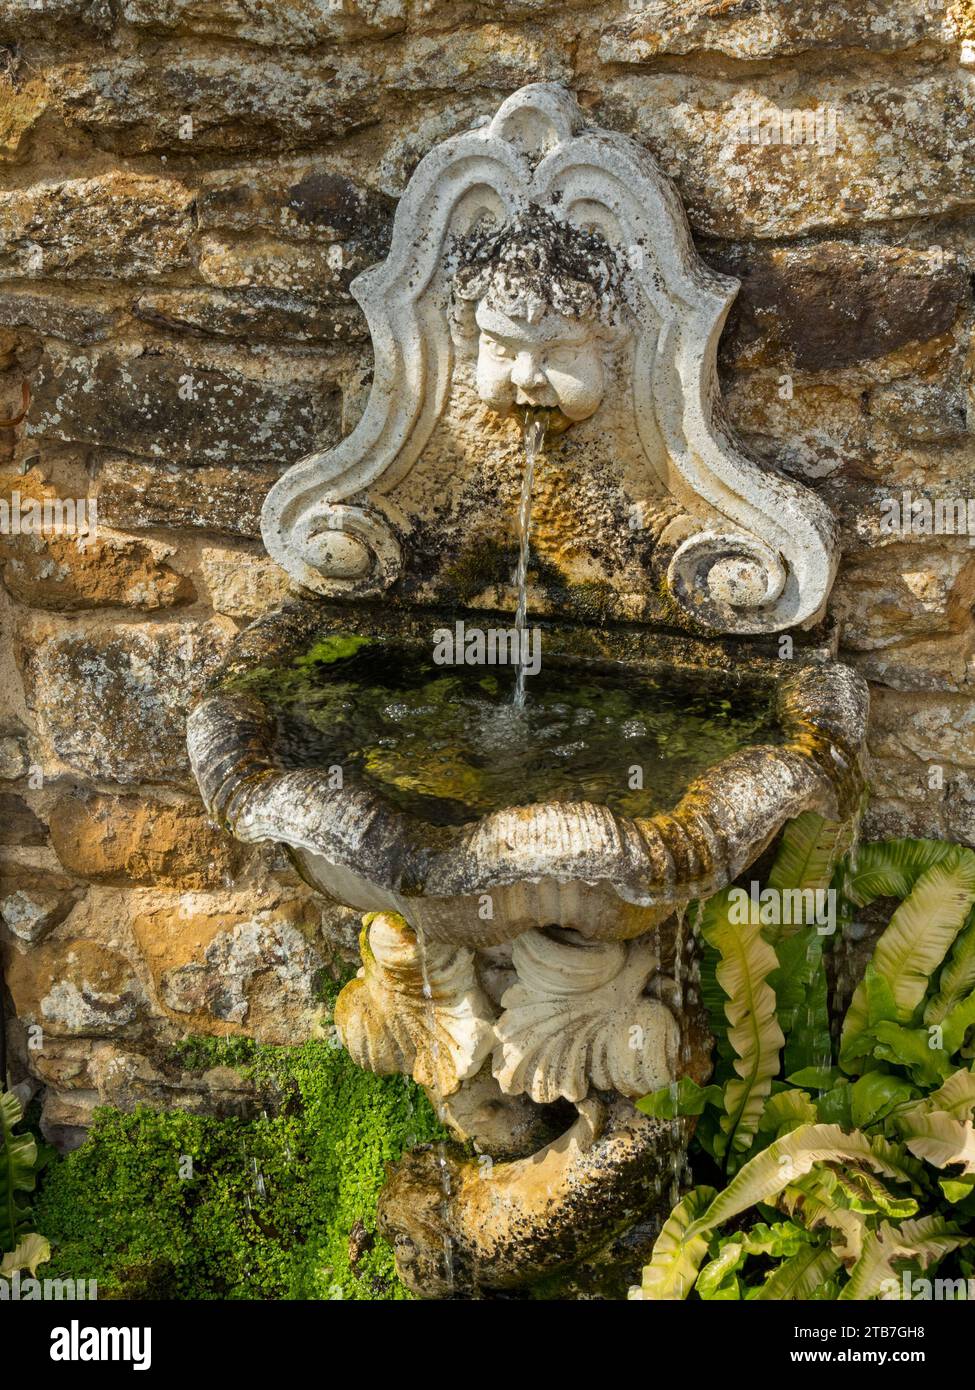 Small wall mounted stone garden water feature / bird bath with water spouting from cherub's mouth. Coton Manor Gardens, Northamptonshire, England, UK Stock Photo